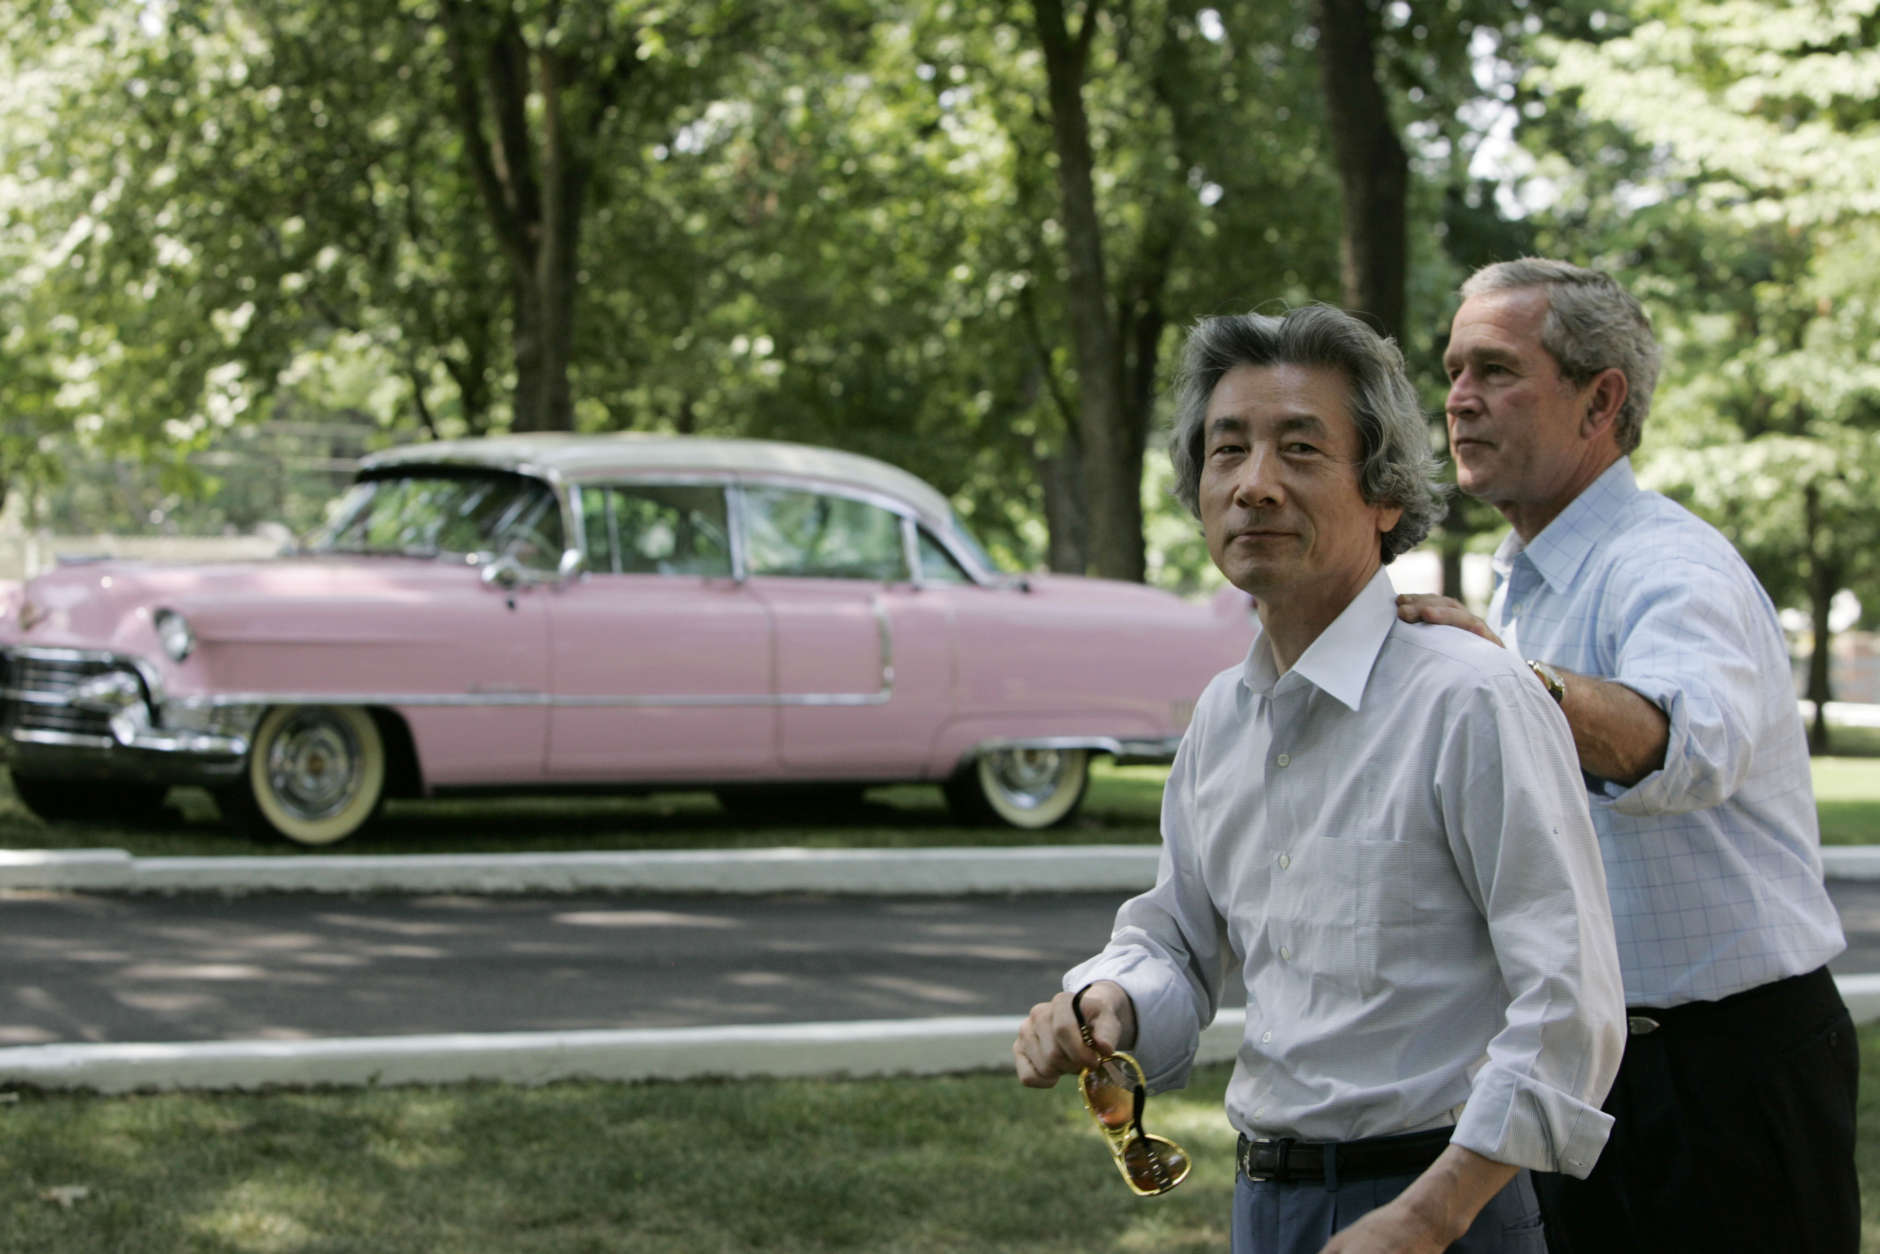 President Bush and Japanese Prime Minister Junichiro Koizumi, carrying a pair of Elvis style sunglasses, walk past Elvis' pink Cadillac after their tour of Graceland, the home of Elvis Presley, in Memphis, Tenn., Friday, June 30, 2006. (AP Photo/Charles Dharapak)